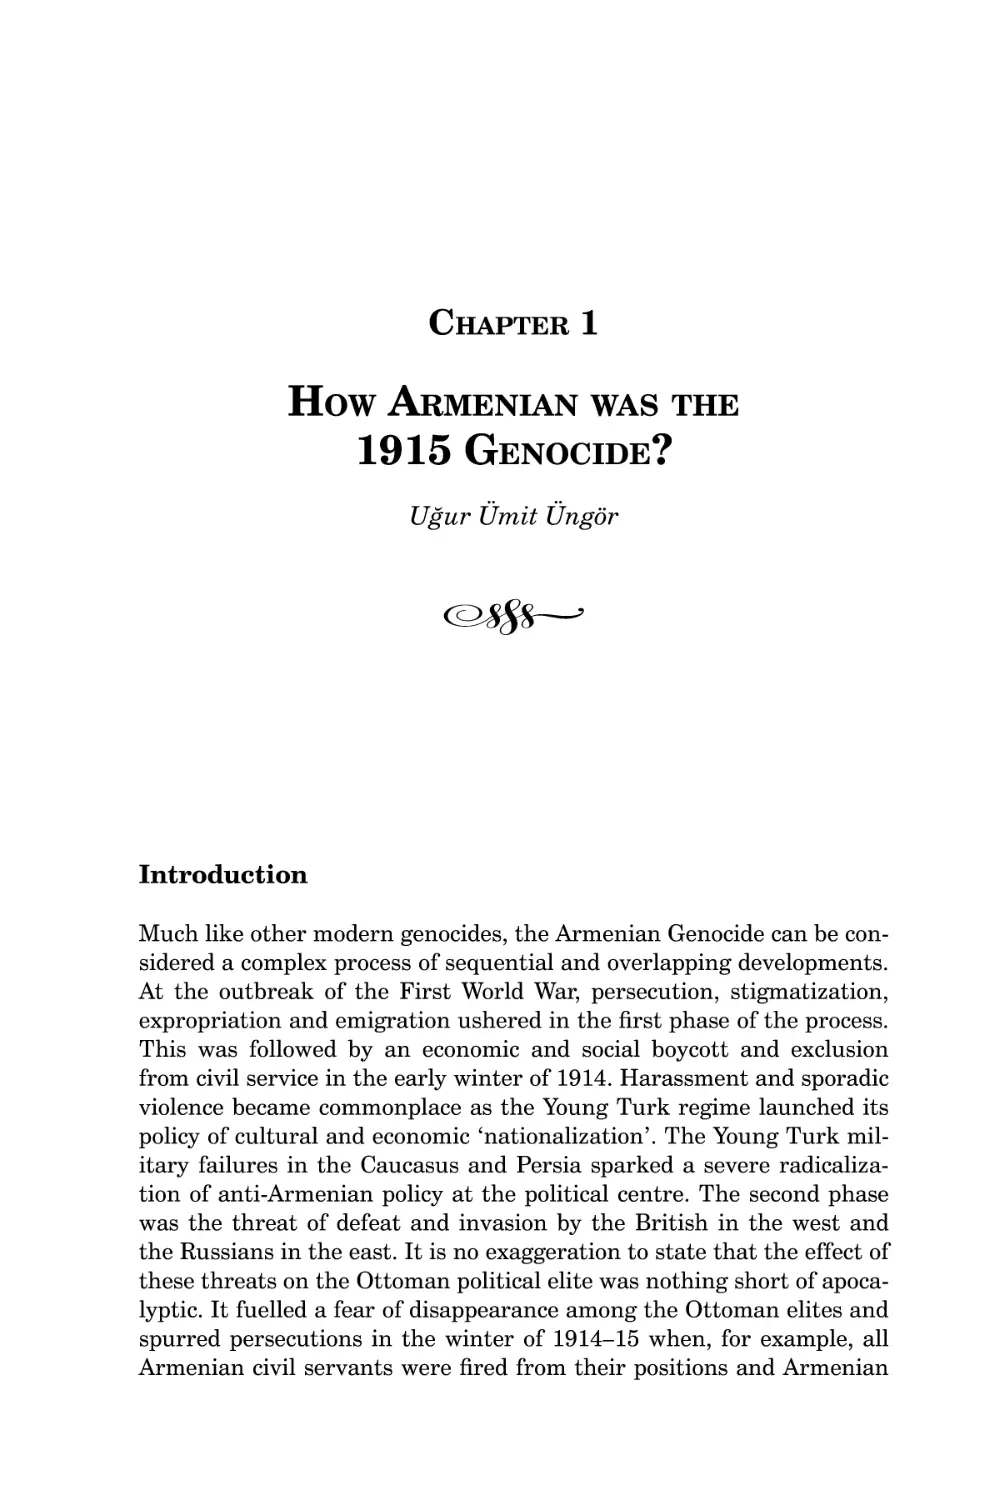 Chapter 1 How Armenian was the 1915 Genocide?